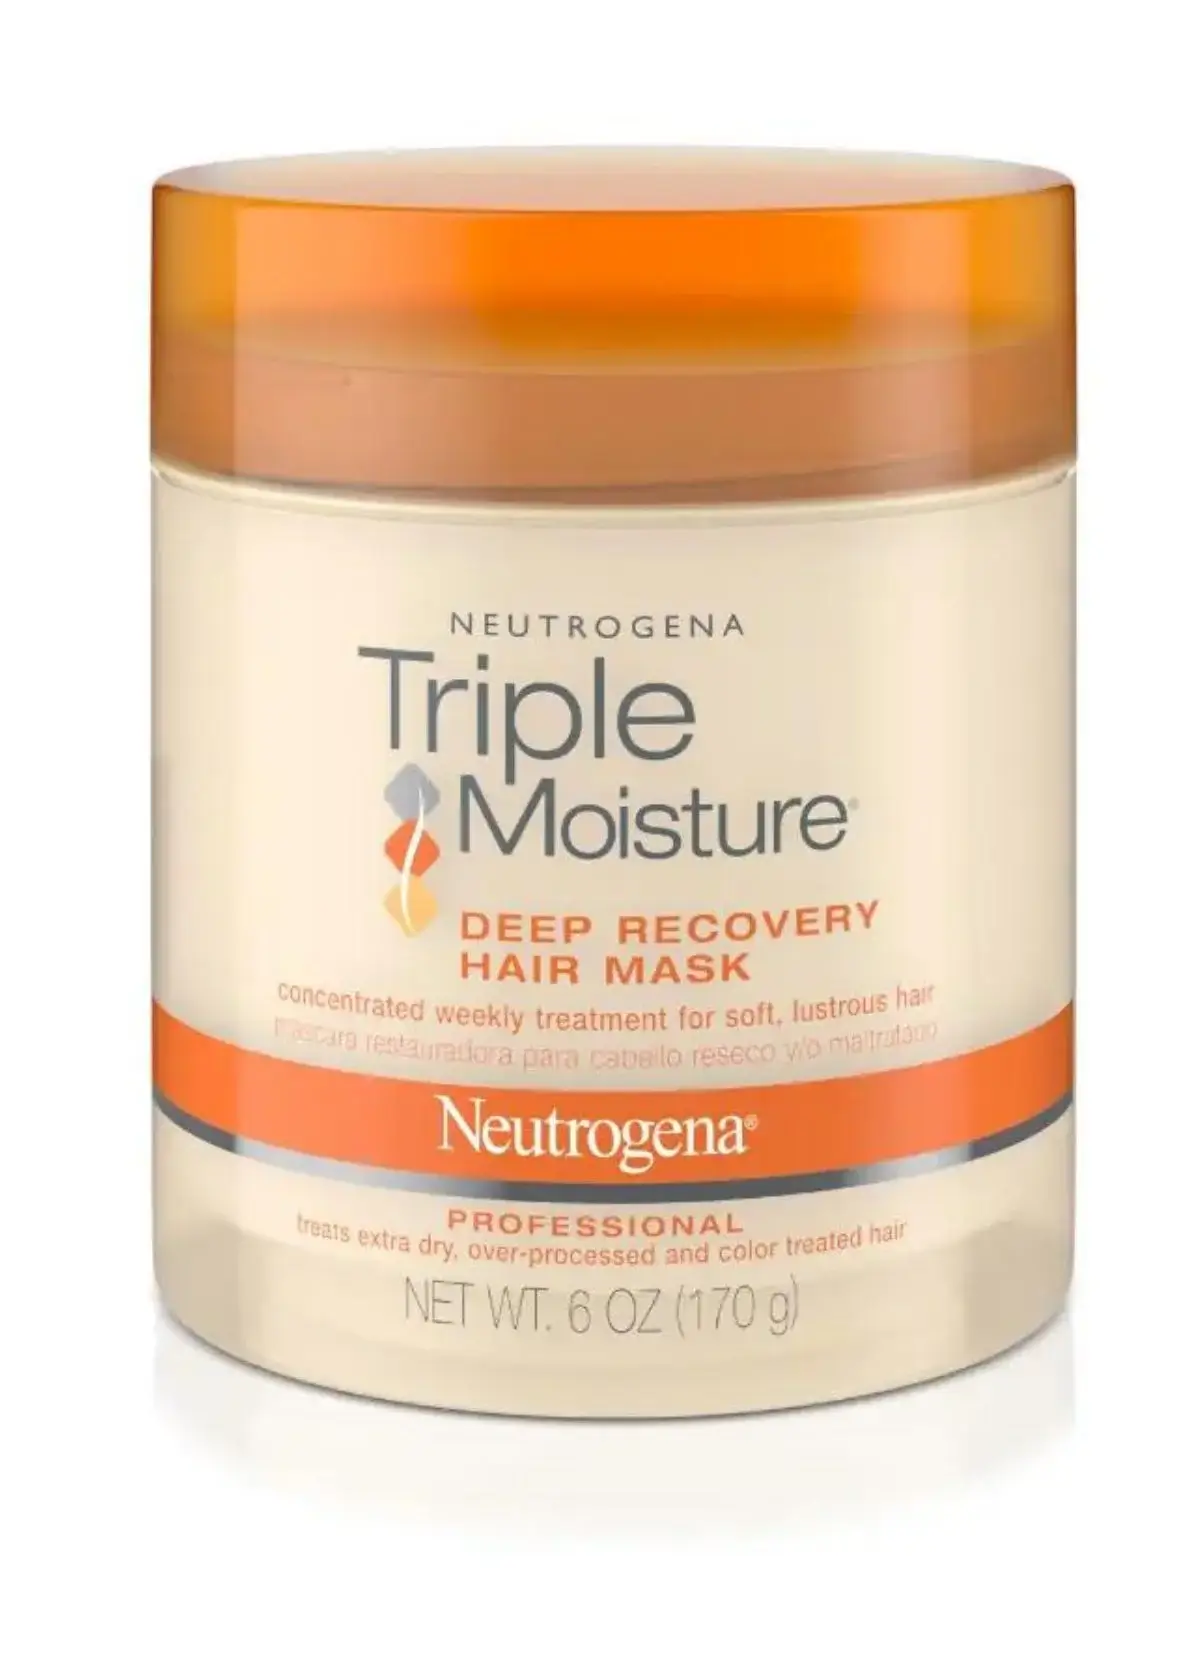 How to choose the right drugstore hair mask?